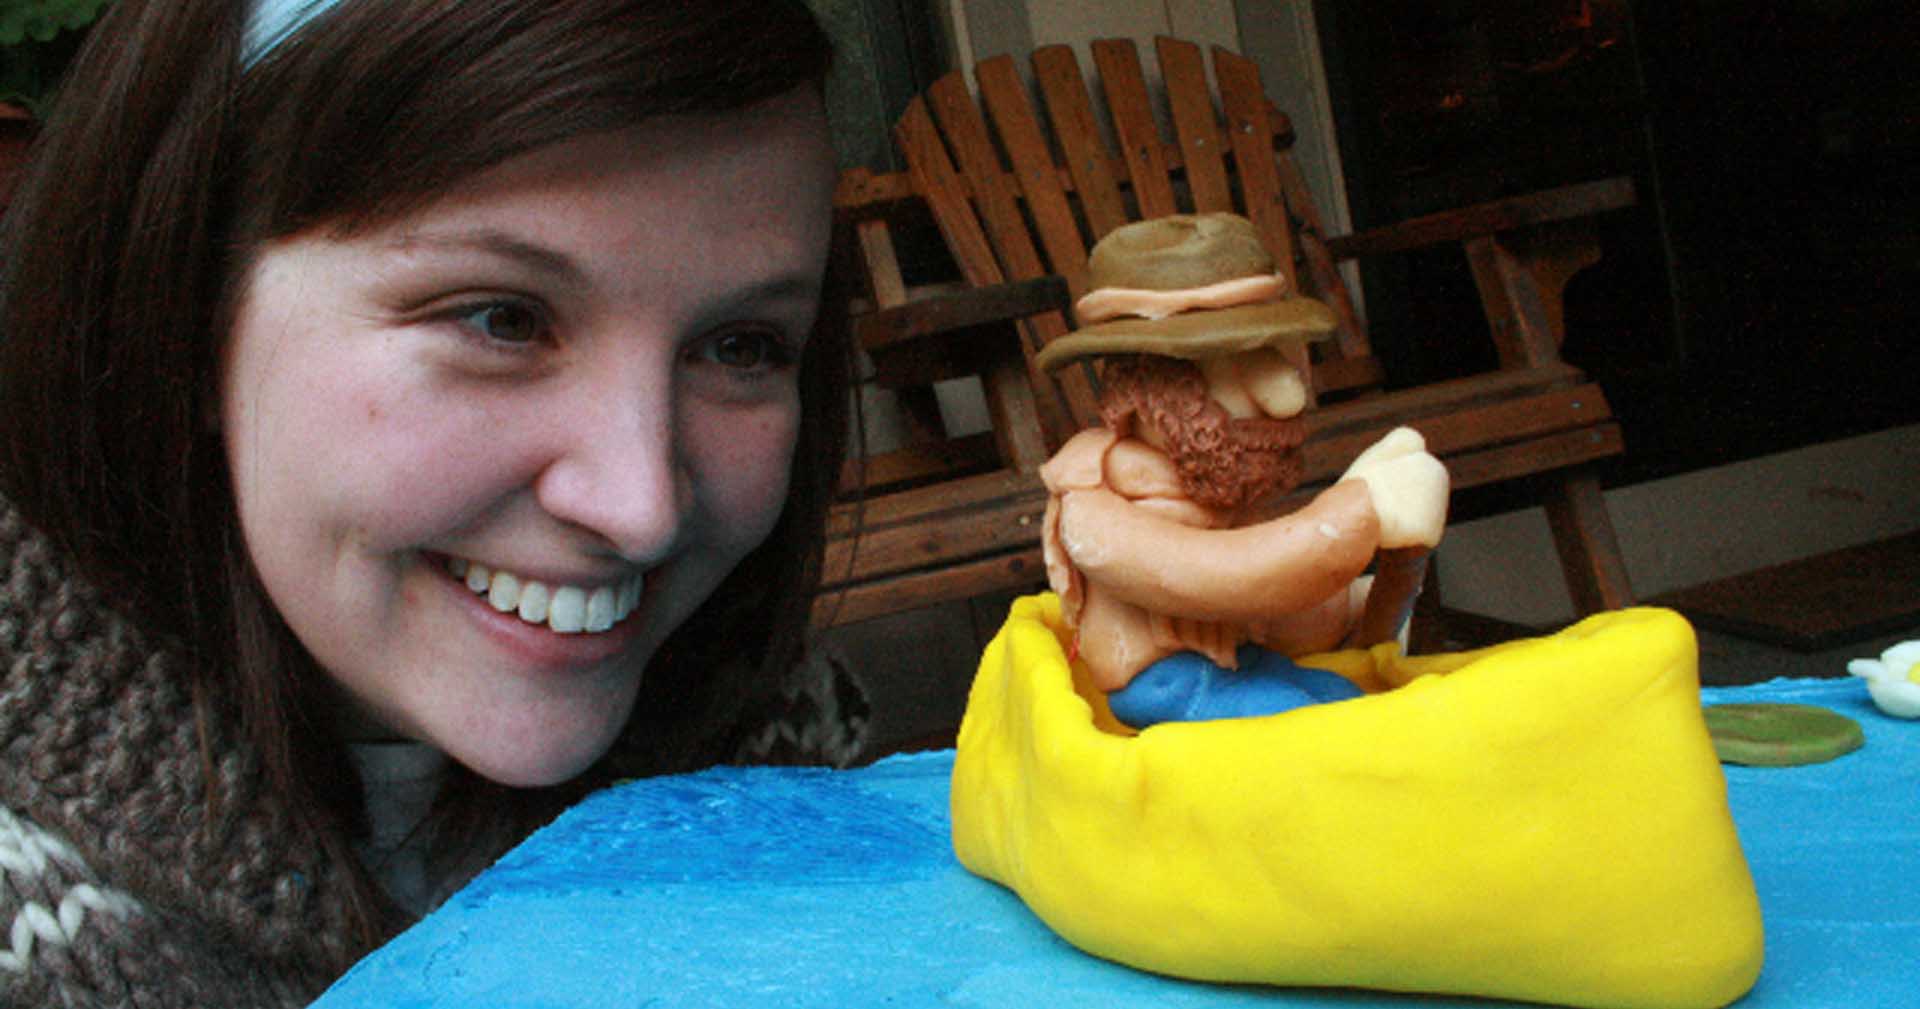 woman smiling looking at cake with a fondant canoe and paddling man cake topper